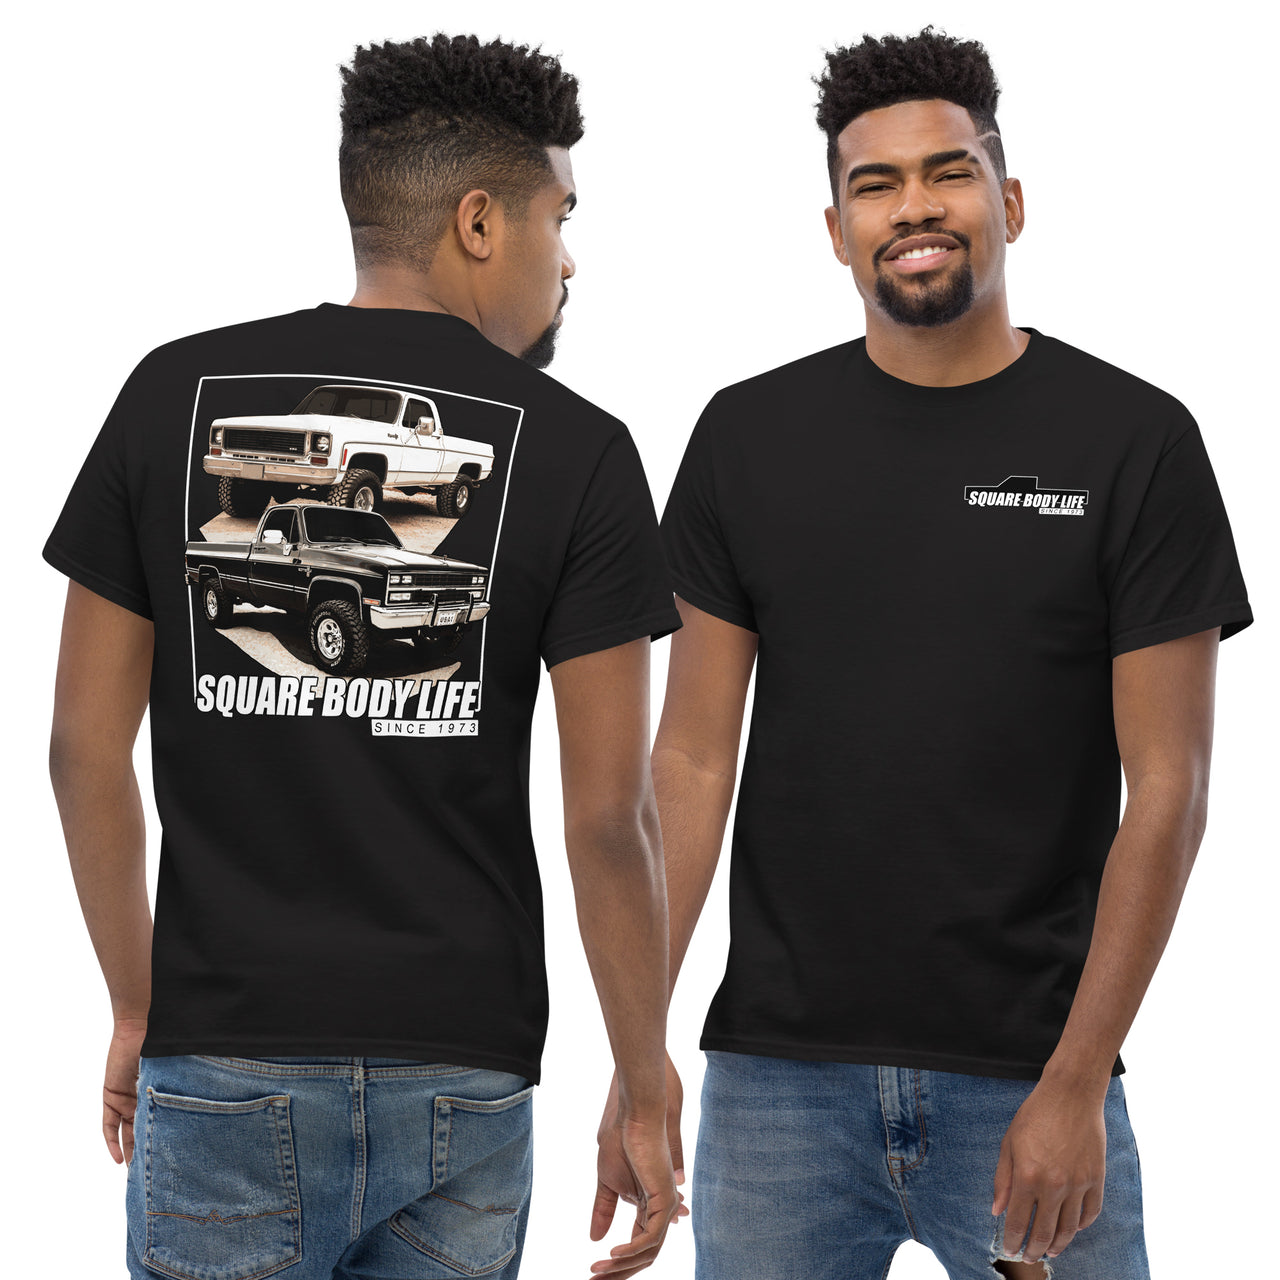 Square Body Life T-Shirt modeled in black